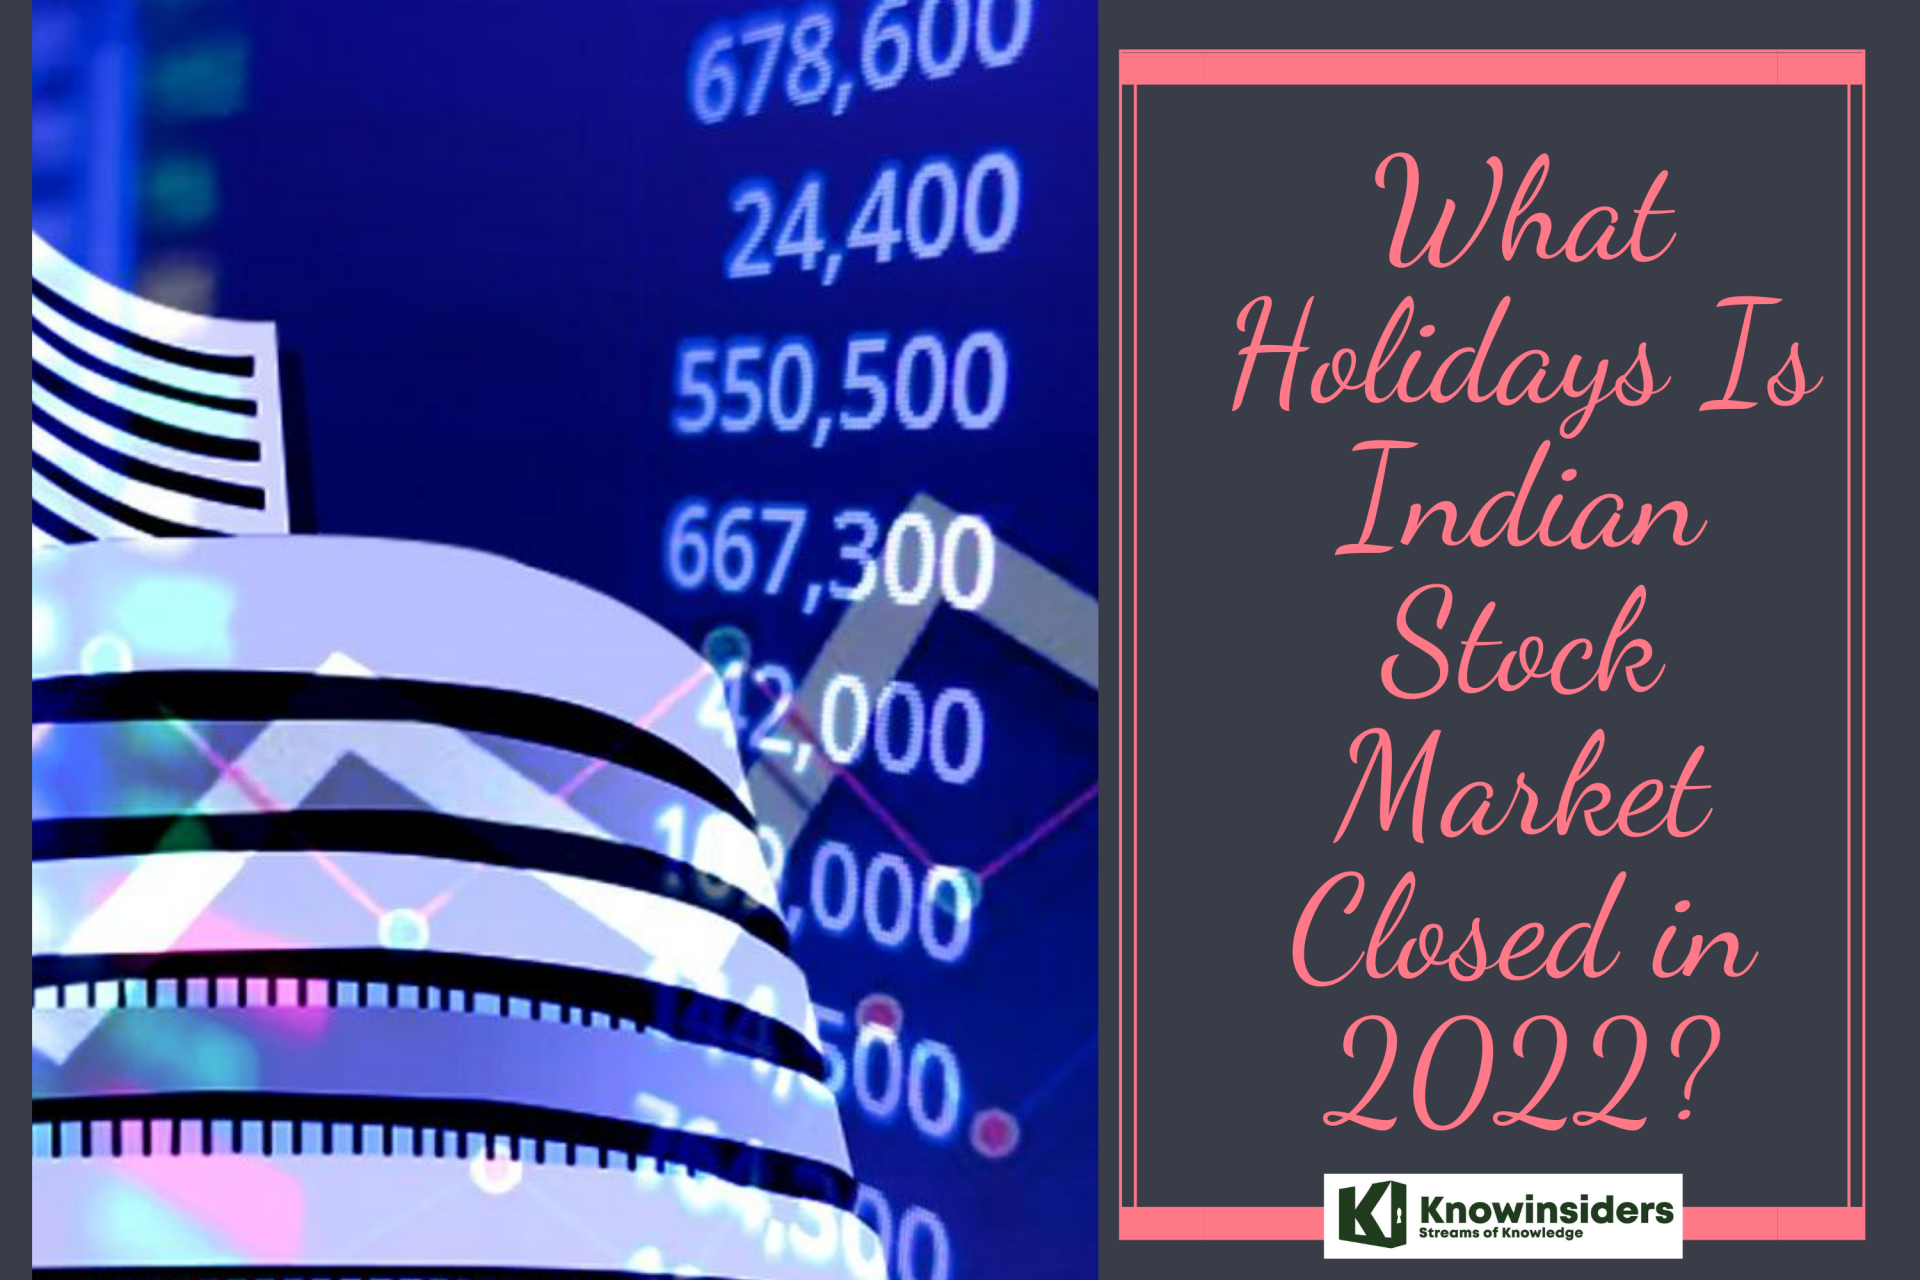 What Holidays Is Indian Stock Market Closed in 2022?